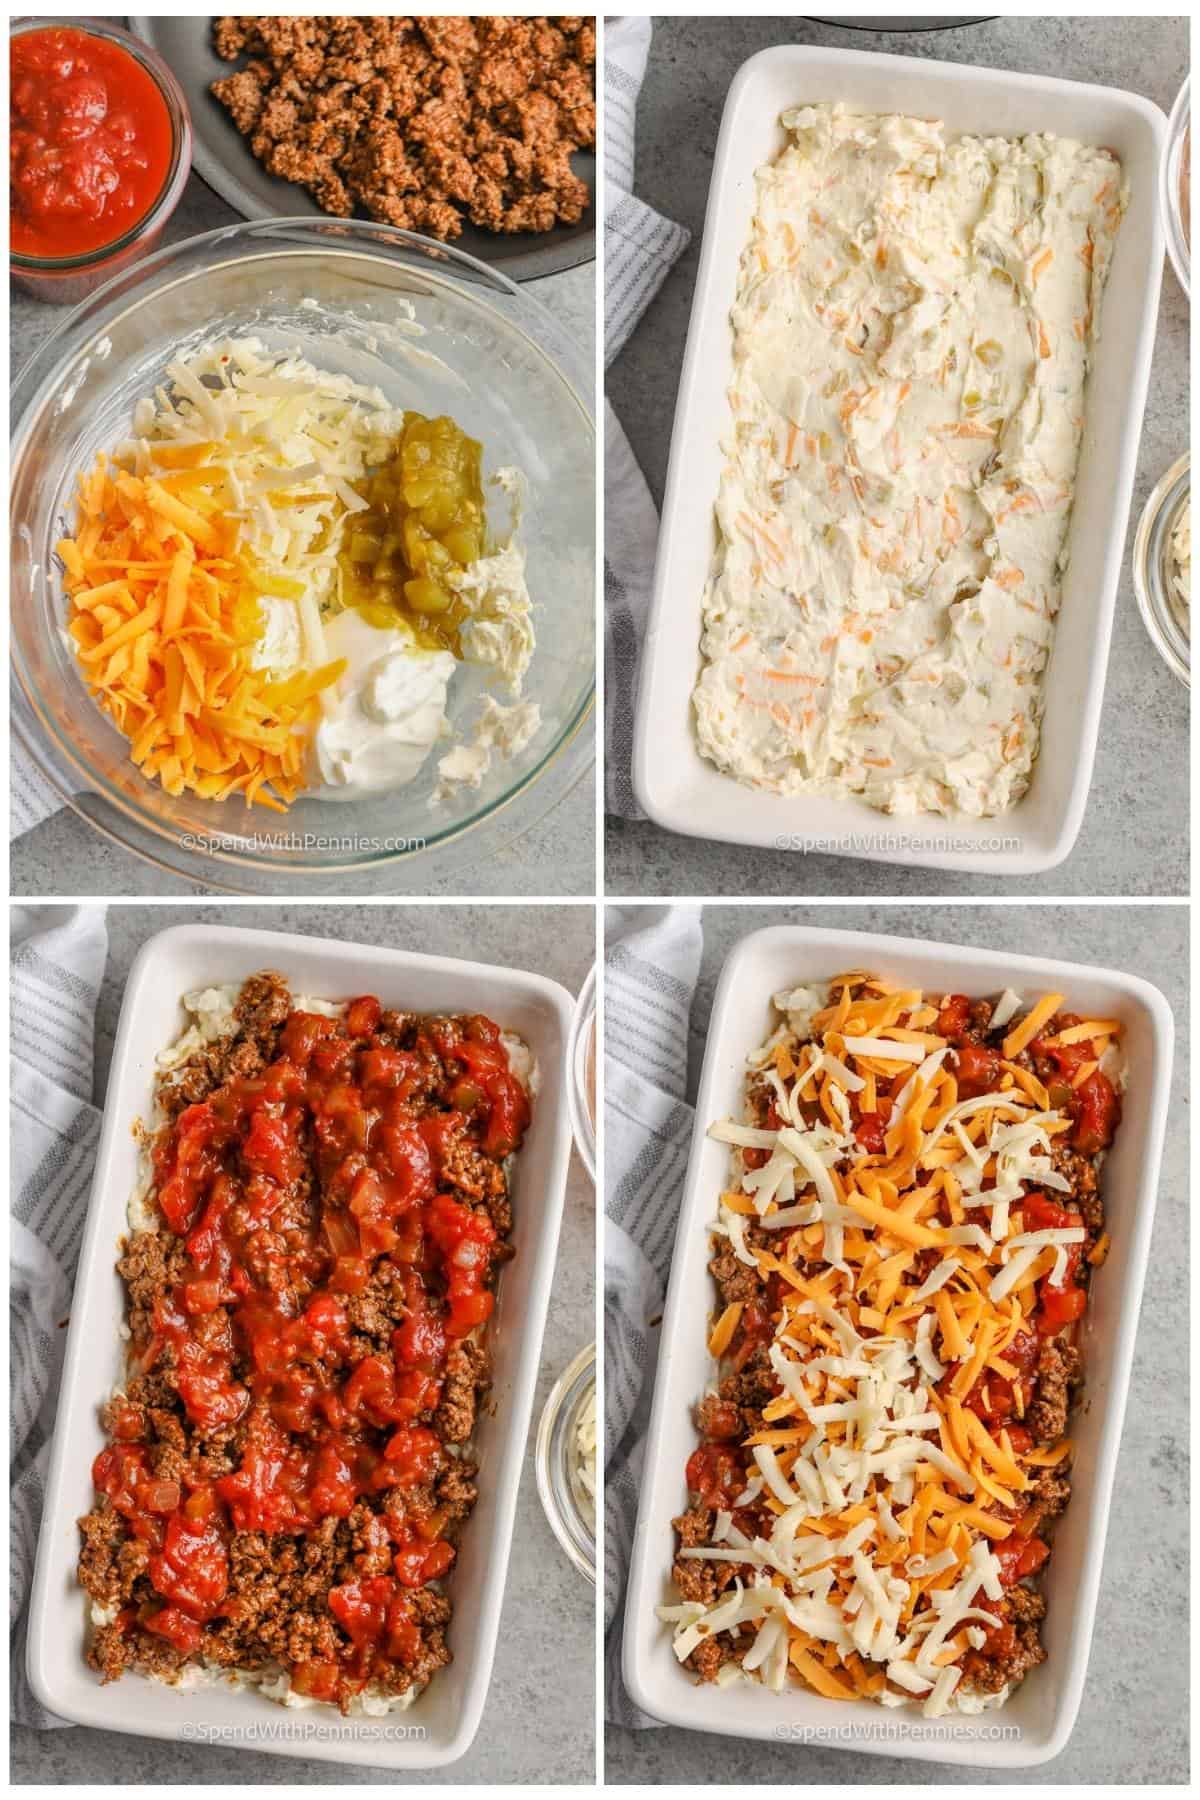 process of mixing ingredients and adding to dish to make Hot & Cheesy Taco Dip